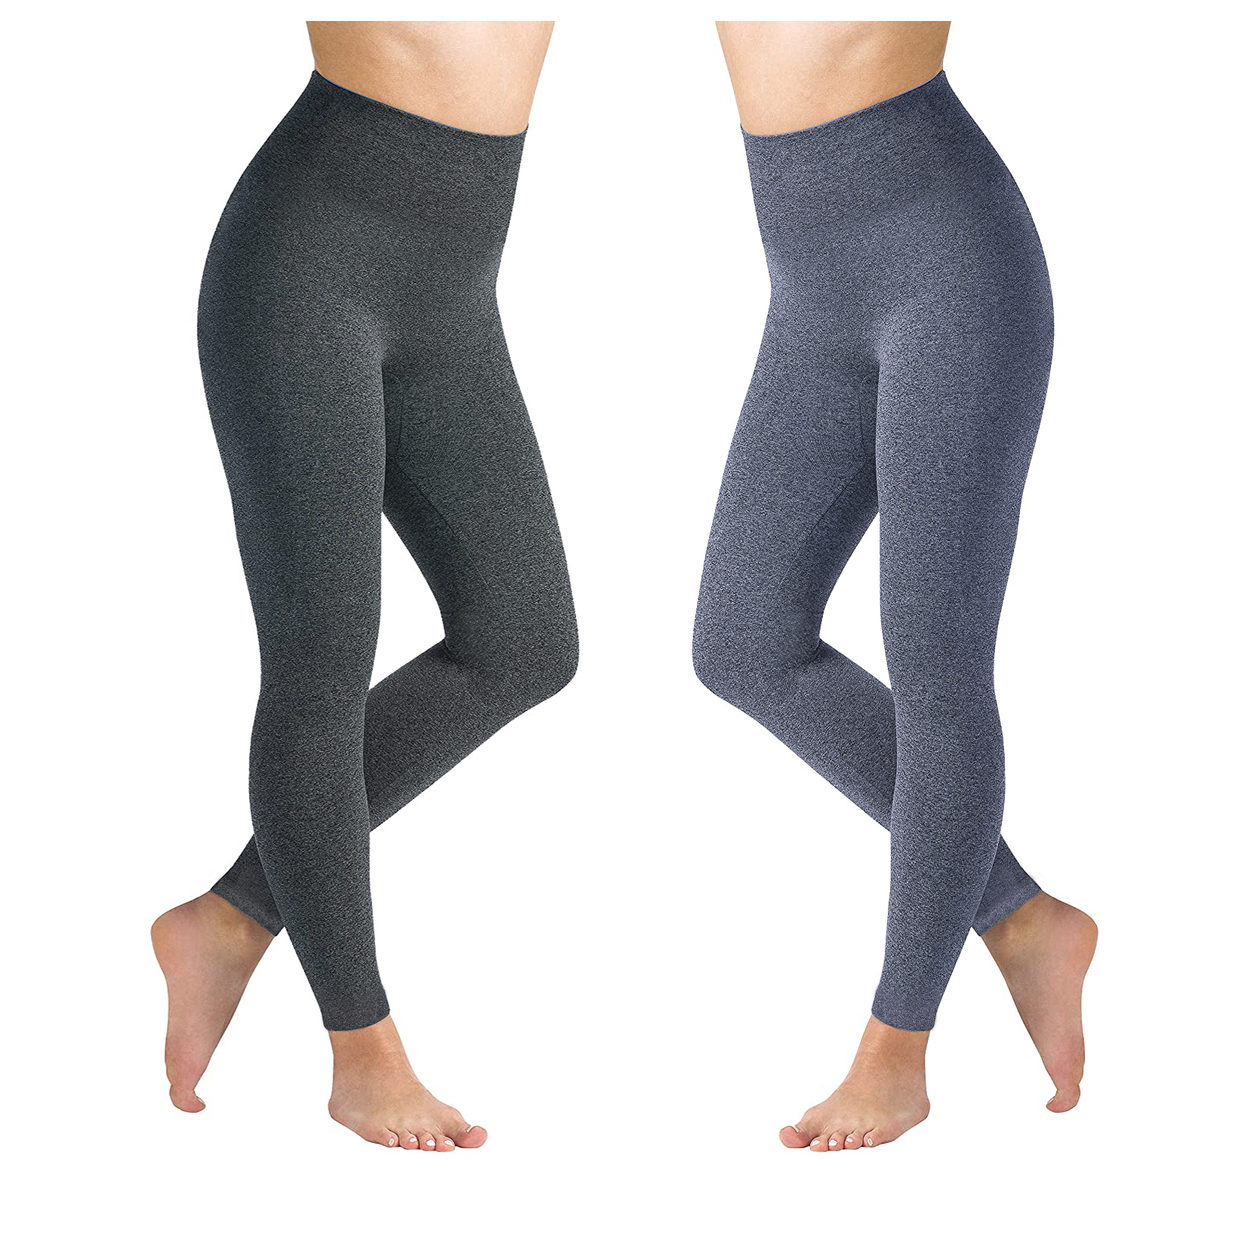 2-Pack: Women's High Waisted Ultra Soft Fleece Lined Warm Marled Leggings(Available In Plus Sizes) - Charcoal & Charcoal, 1x